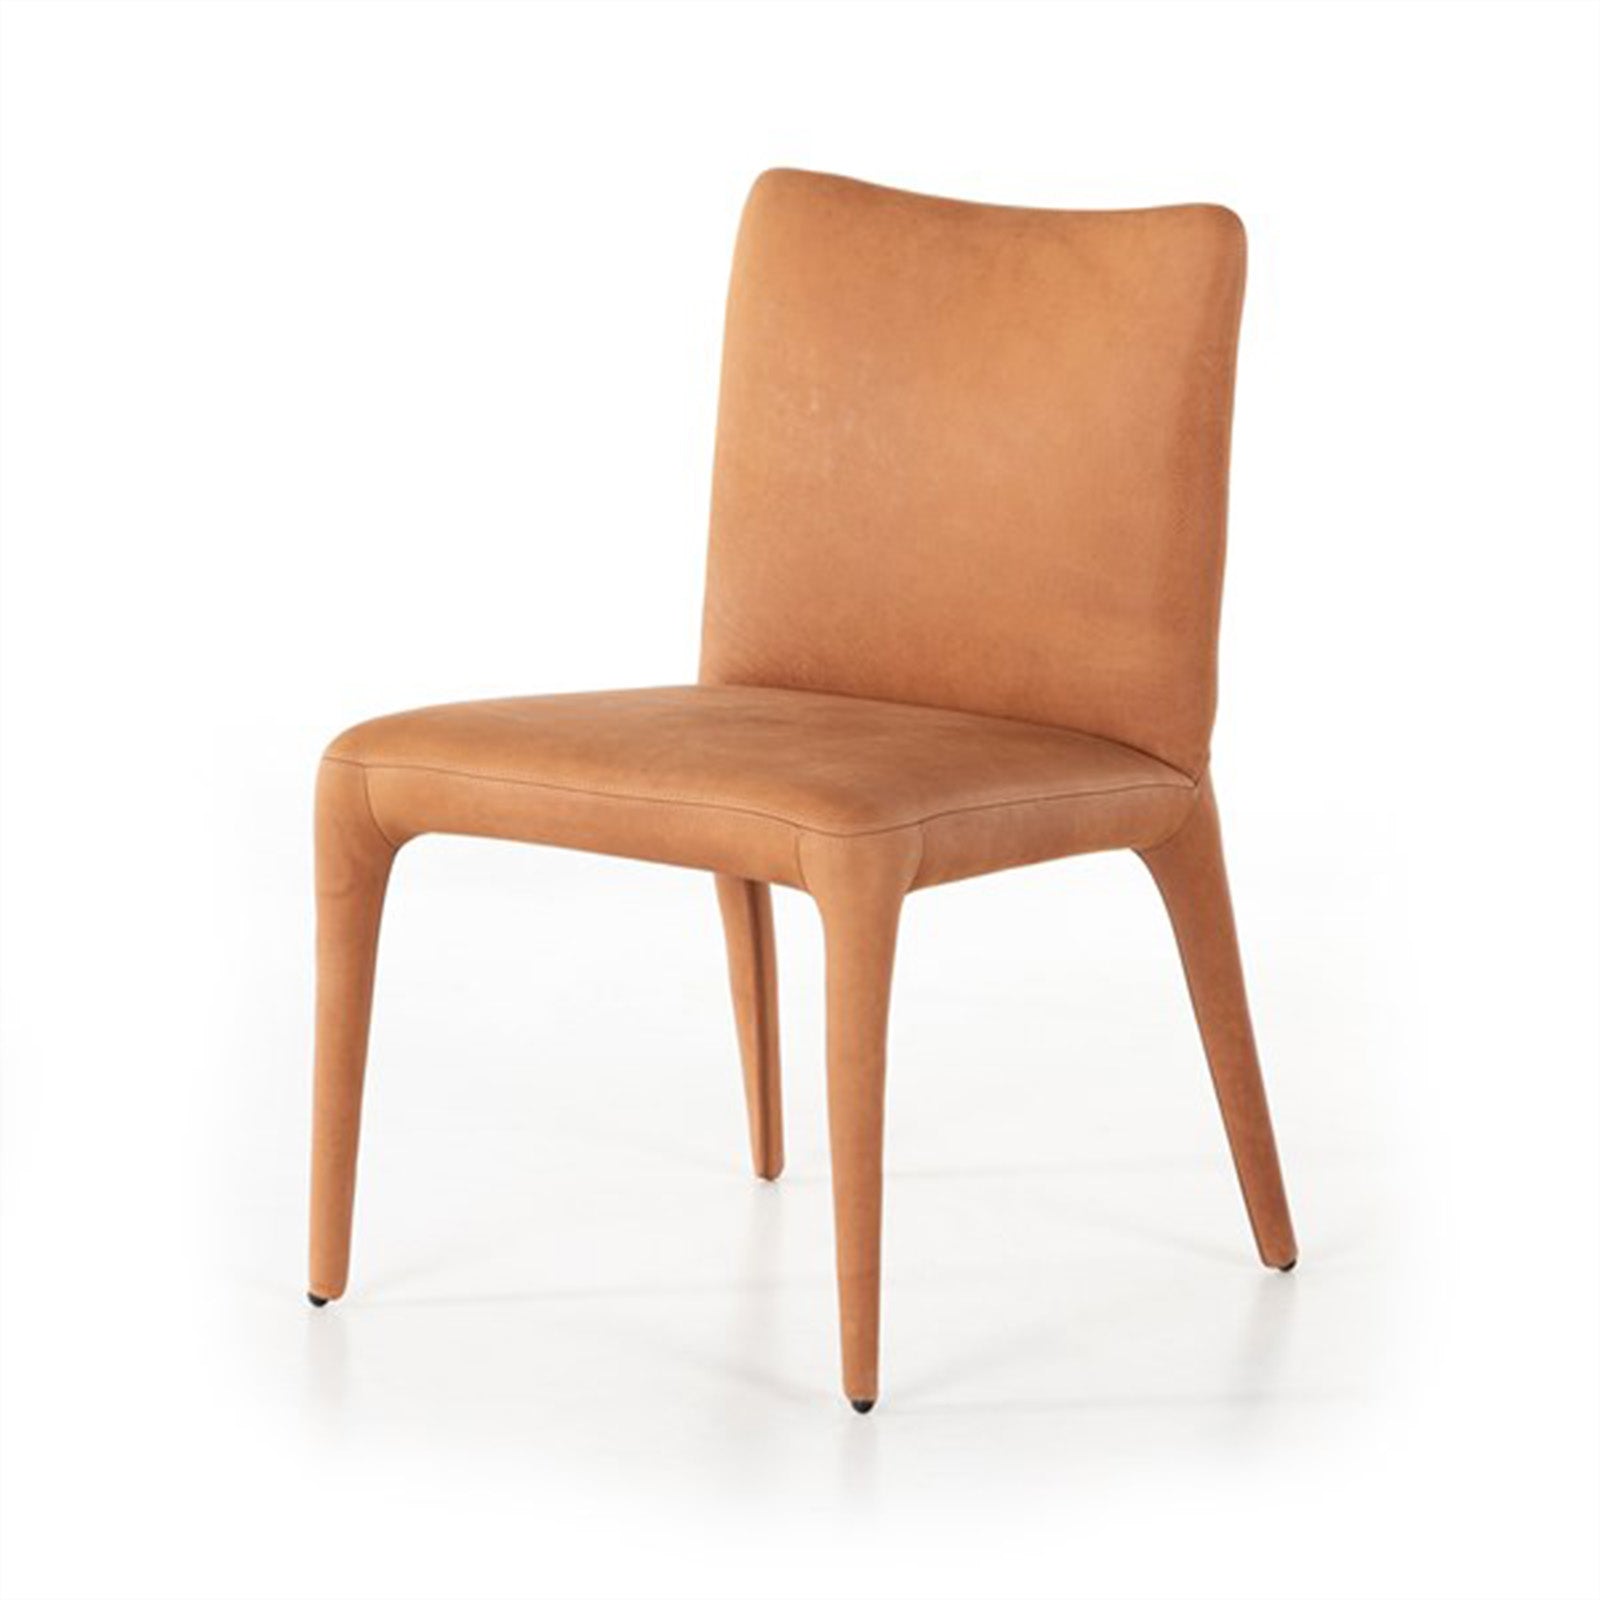 Monza Dining Chair, Camel